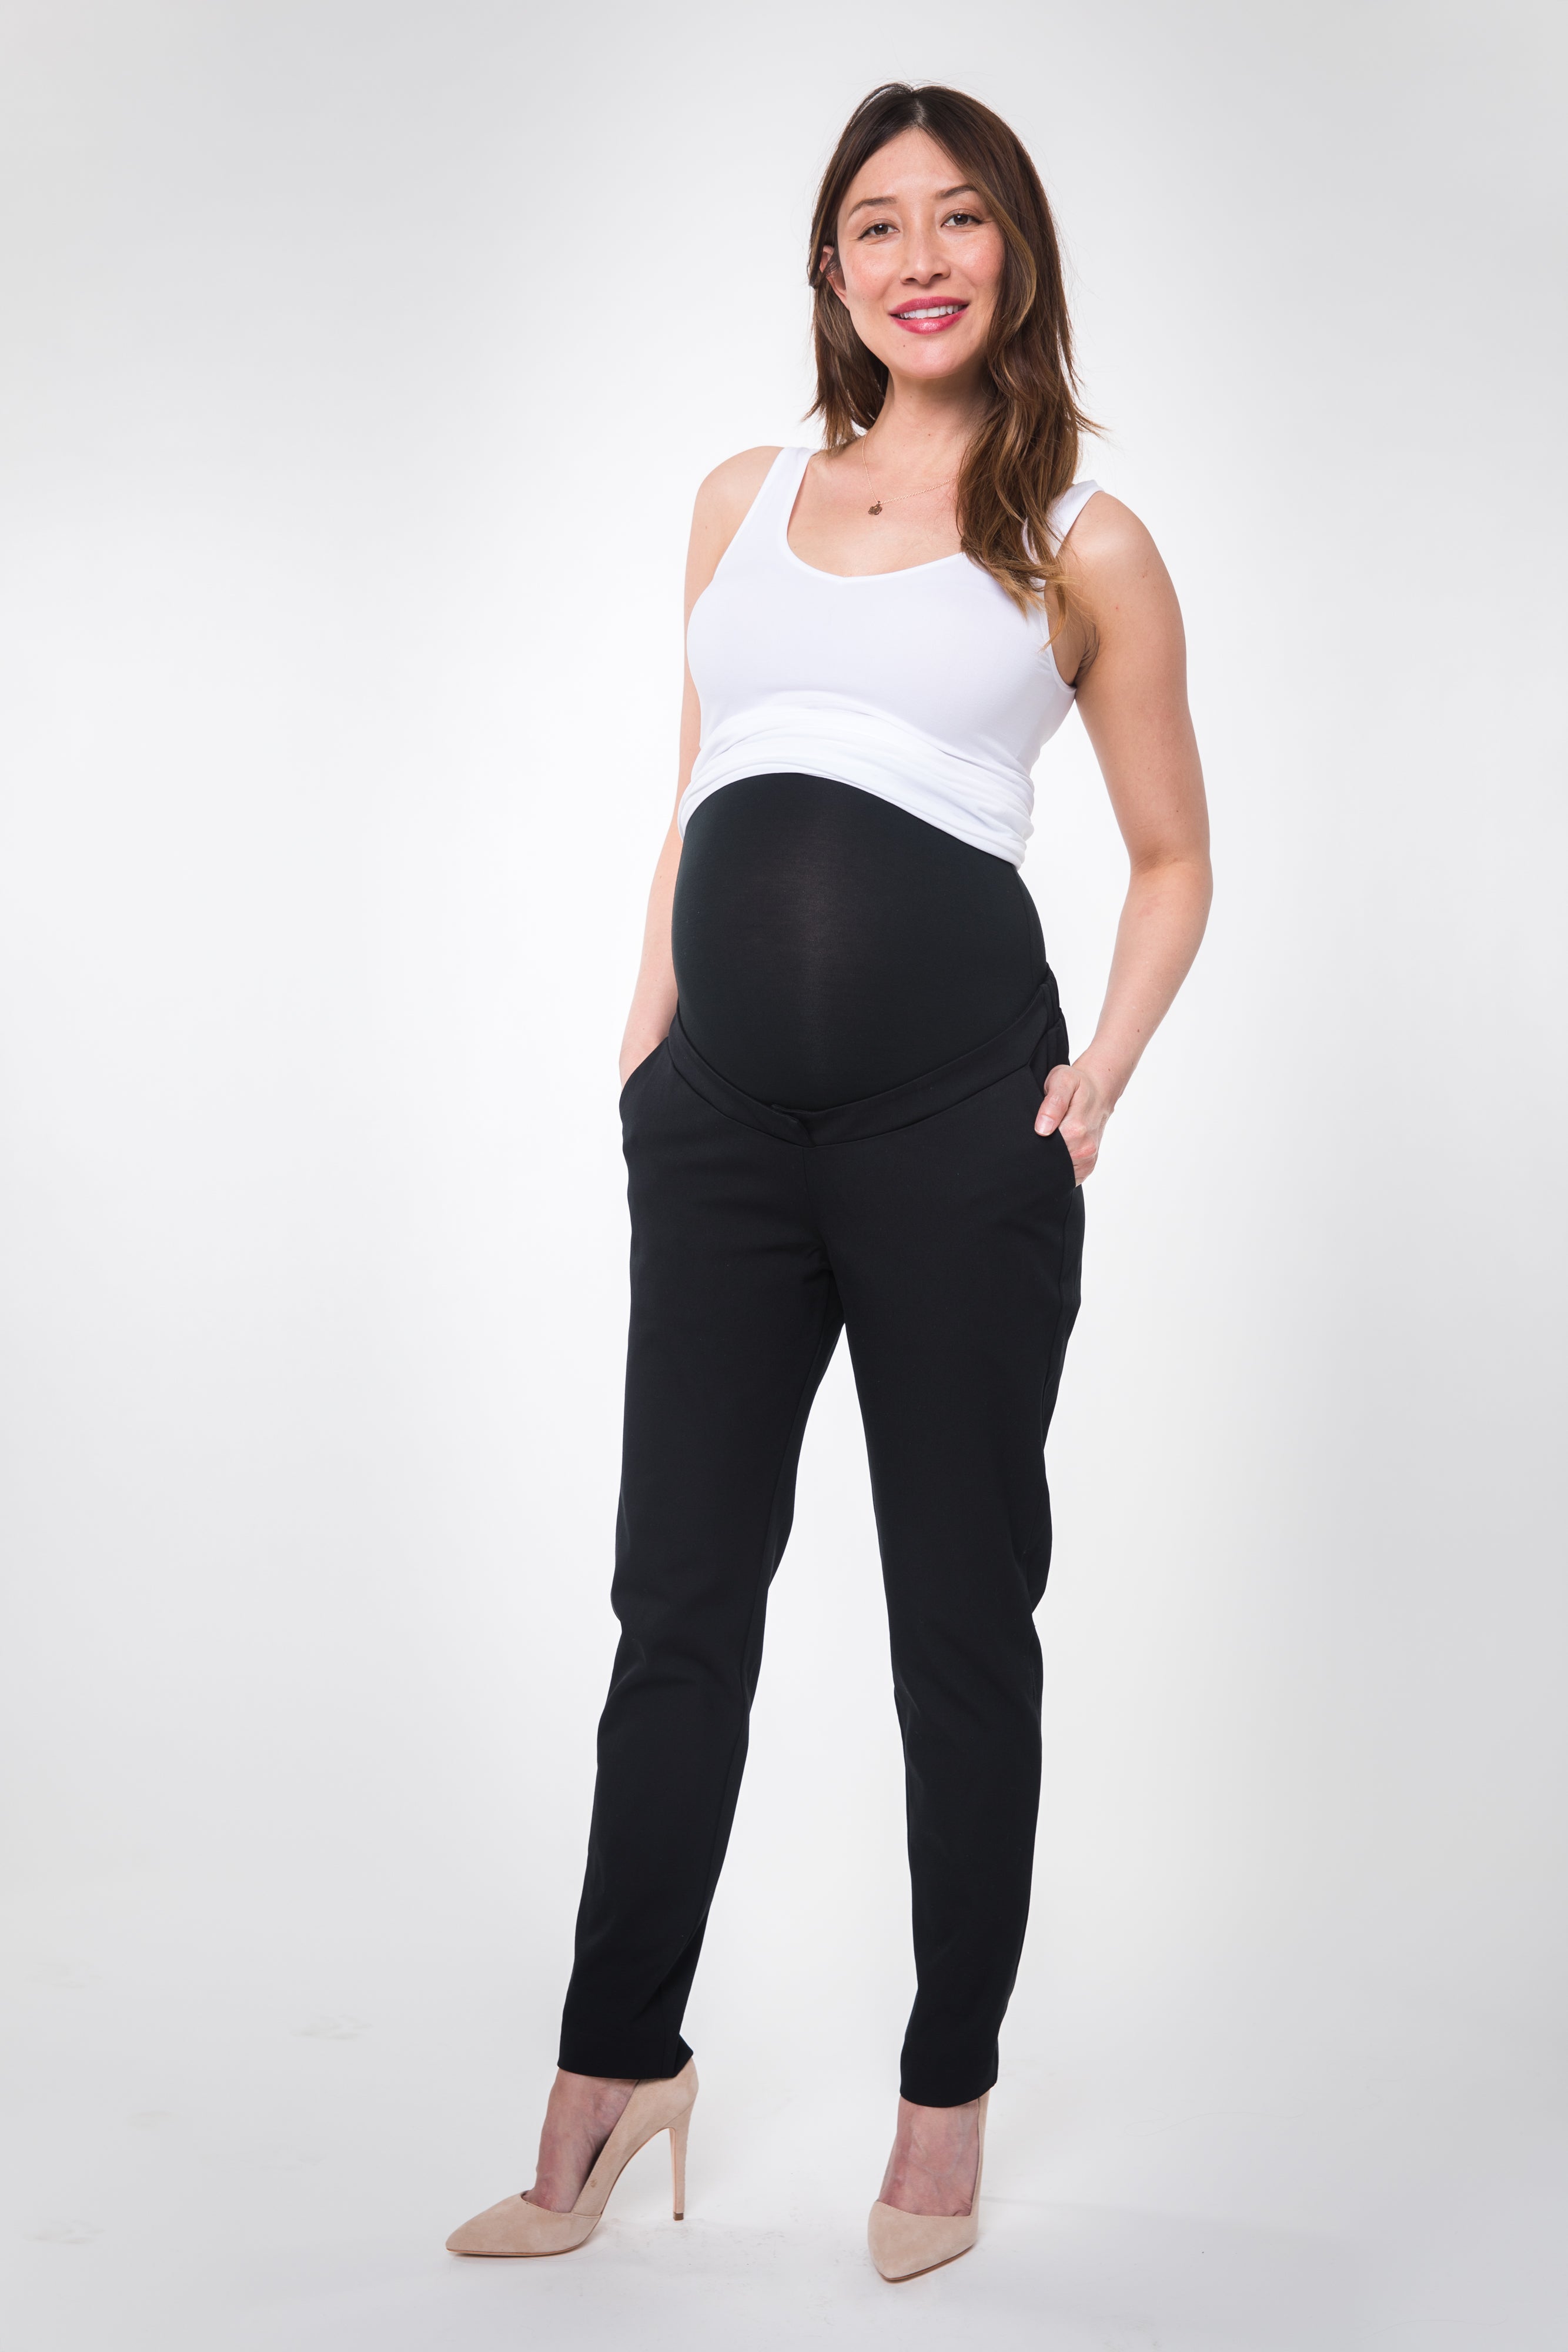 Buy Maternity Pants Comfortable Stretch OverBump Women Pregnancy Casual  Capris for Work XS Size 02 Black at Amazonin